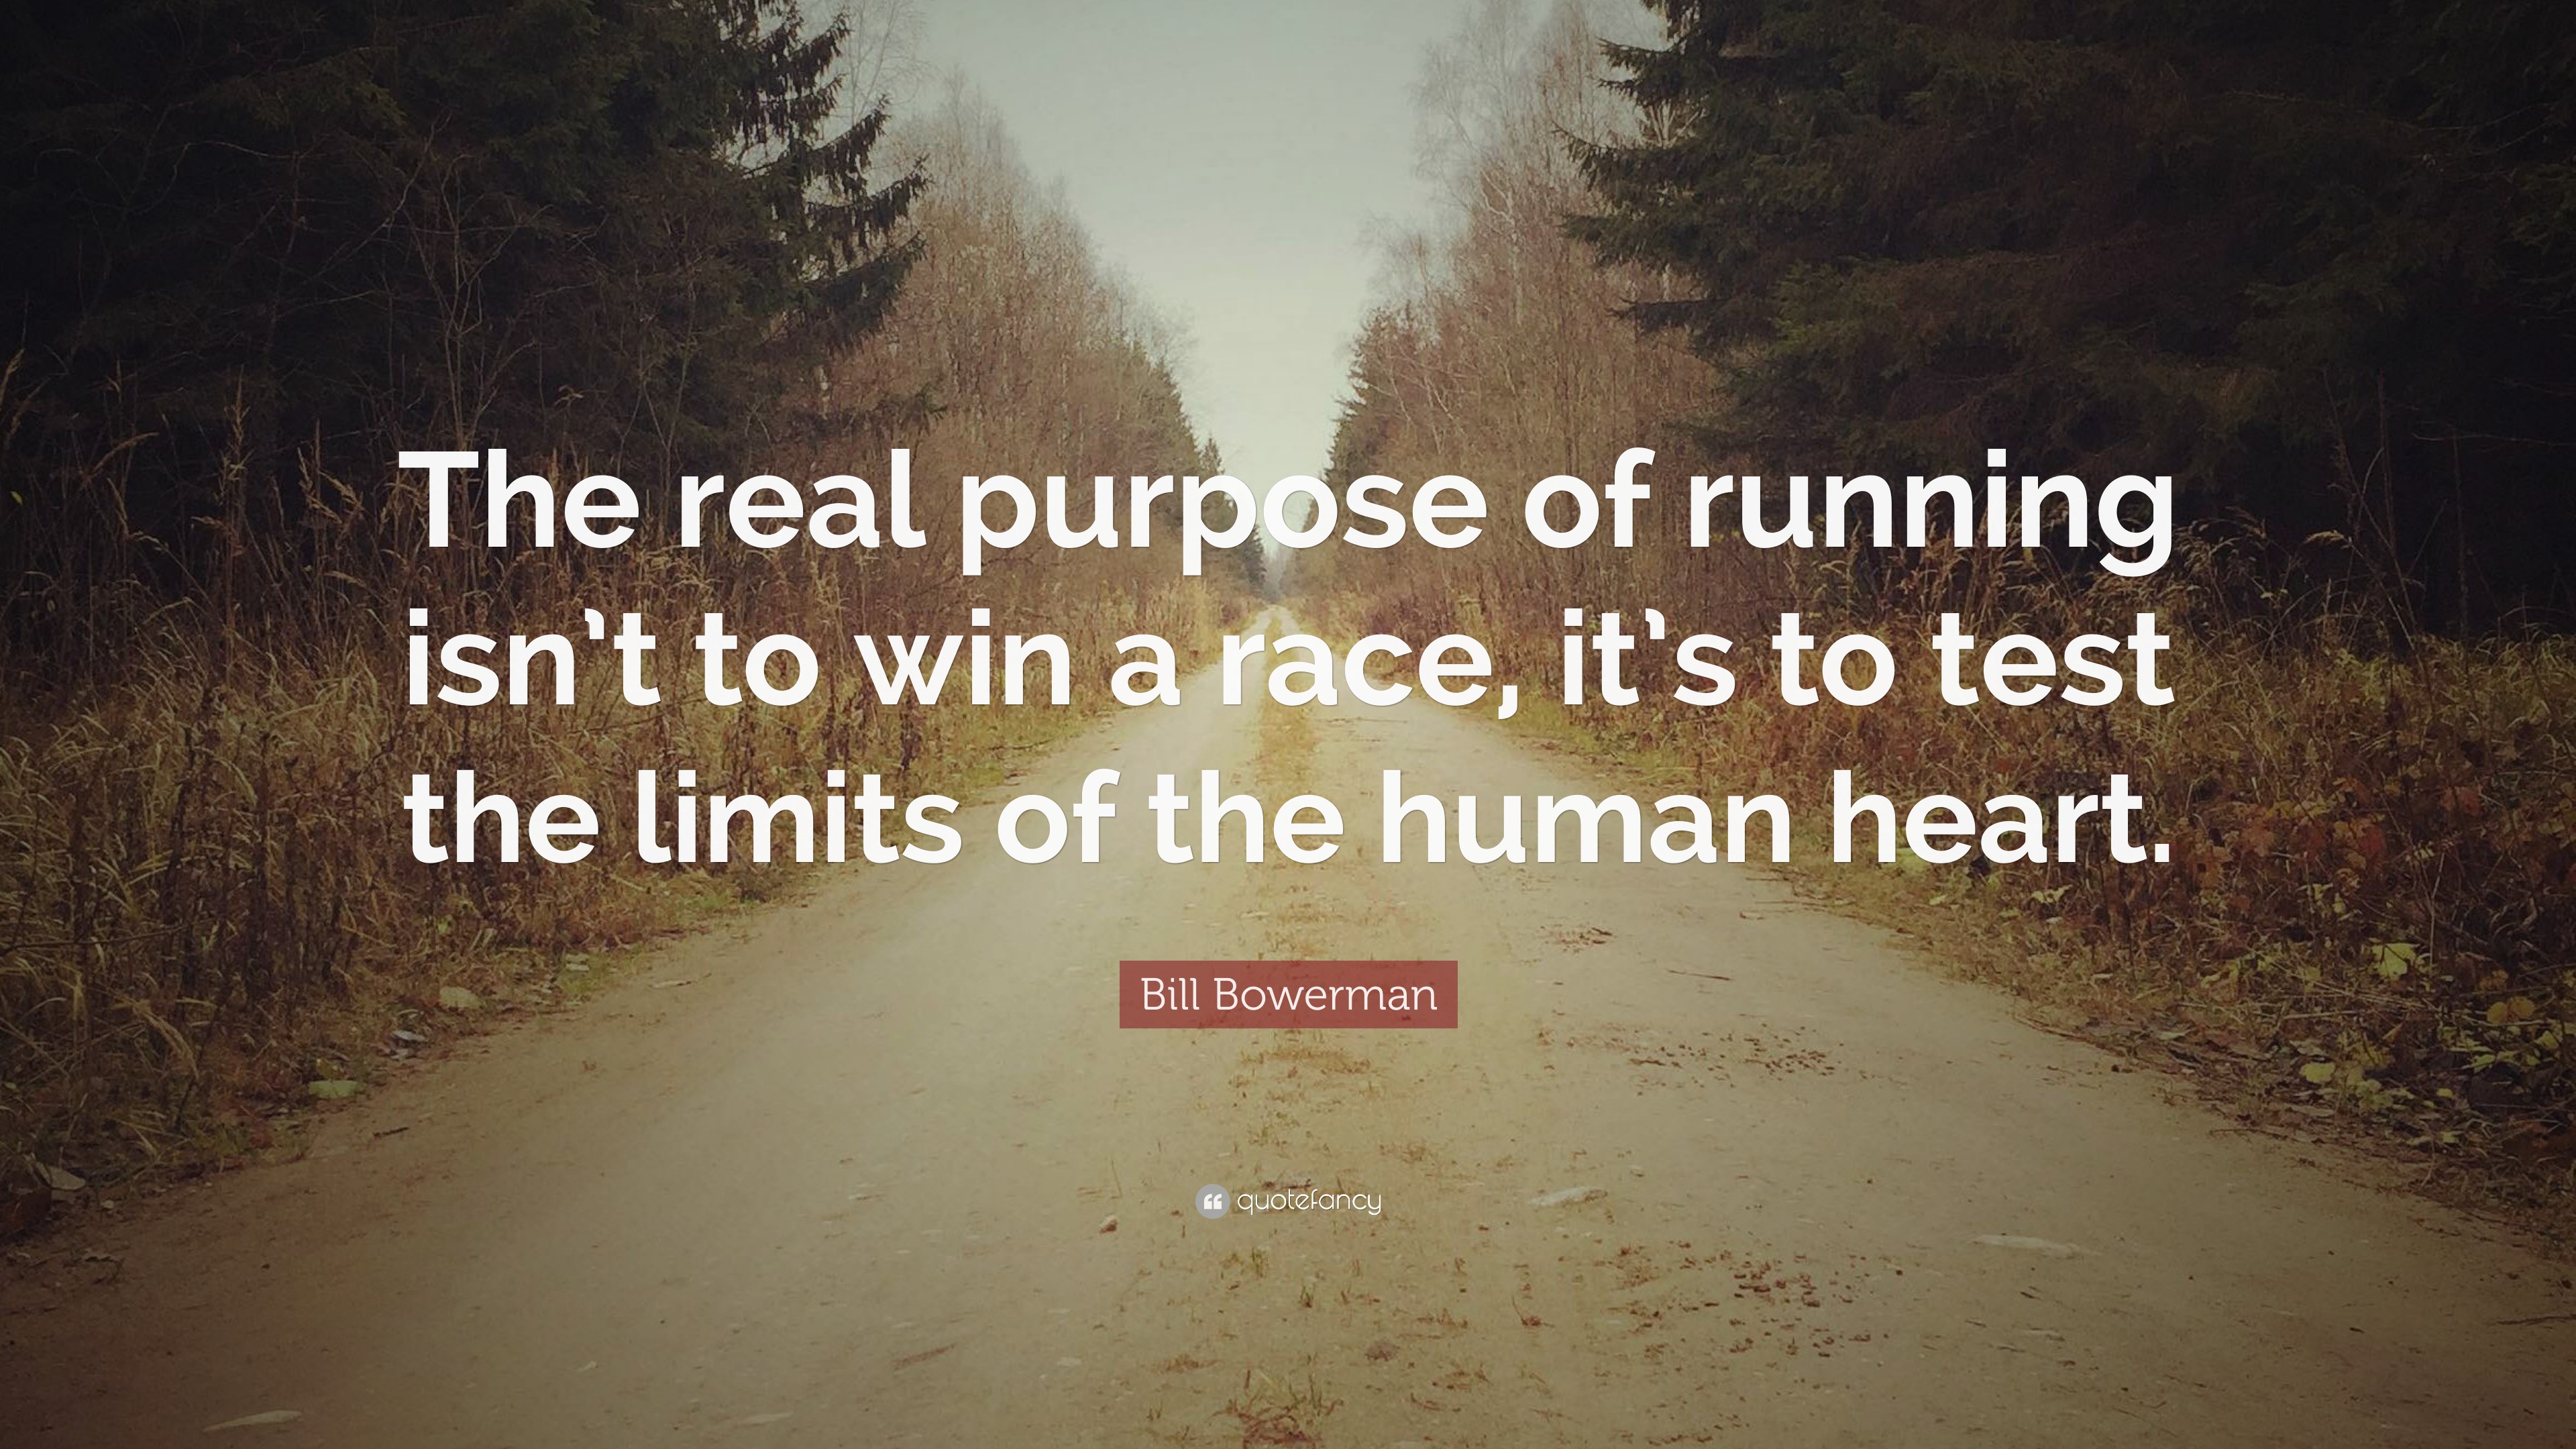 Bill Bowerman Quote: "The real purpose of running isn't to win a race, it's to test the limits ...